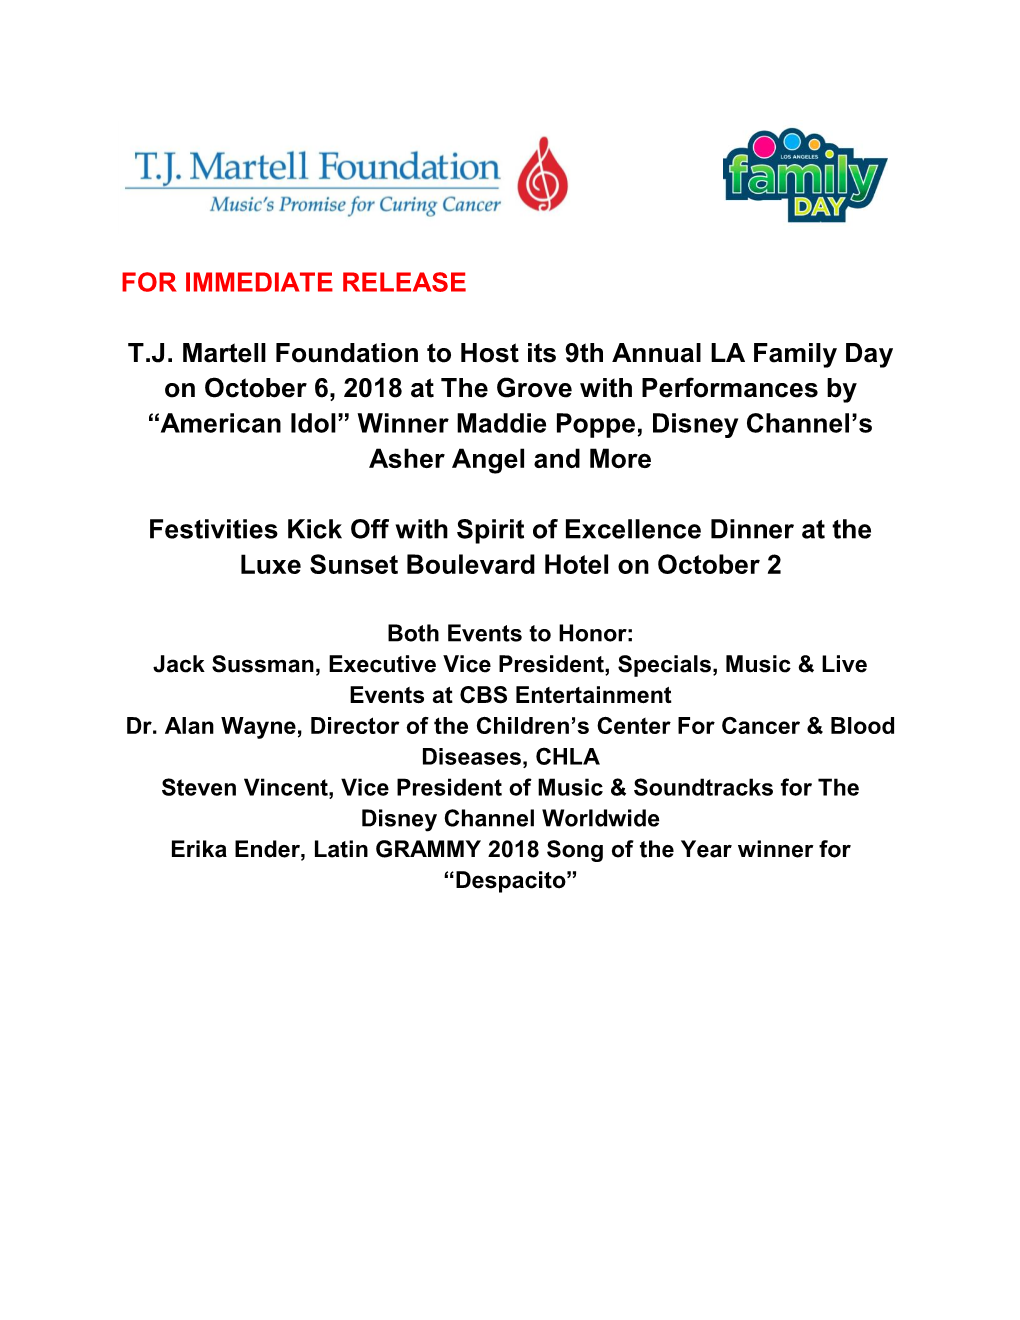 FOR IMMEDIATE RELEASE T.J. Martell Foundation to Host Its 9Th Annual LA Family Day on October 6, 2018 at the Grove with Performa